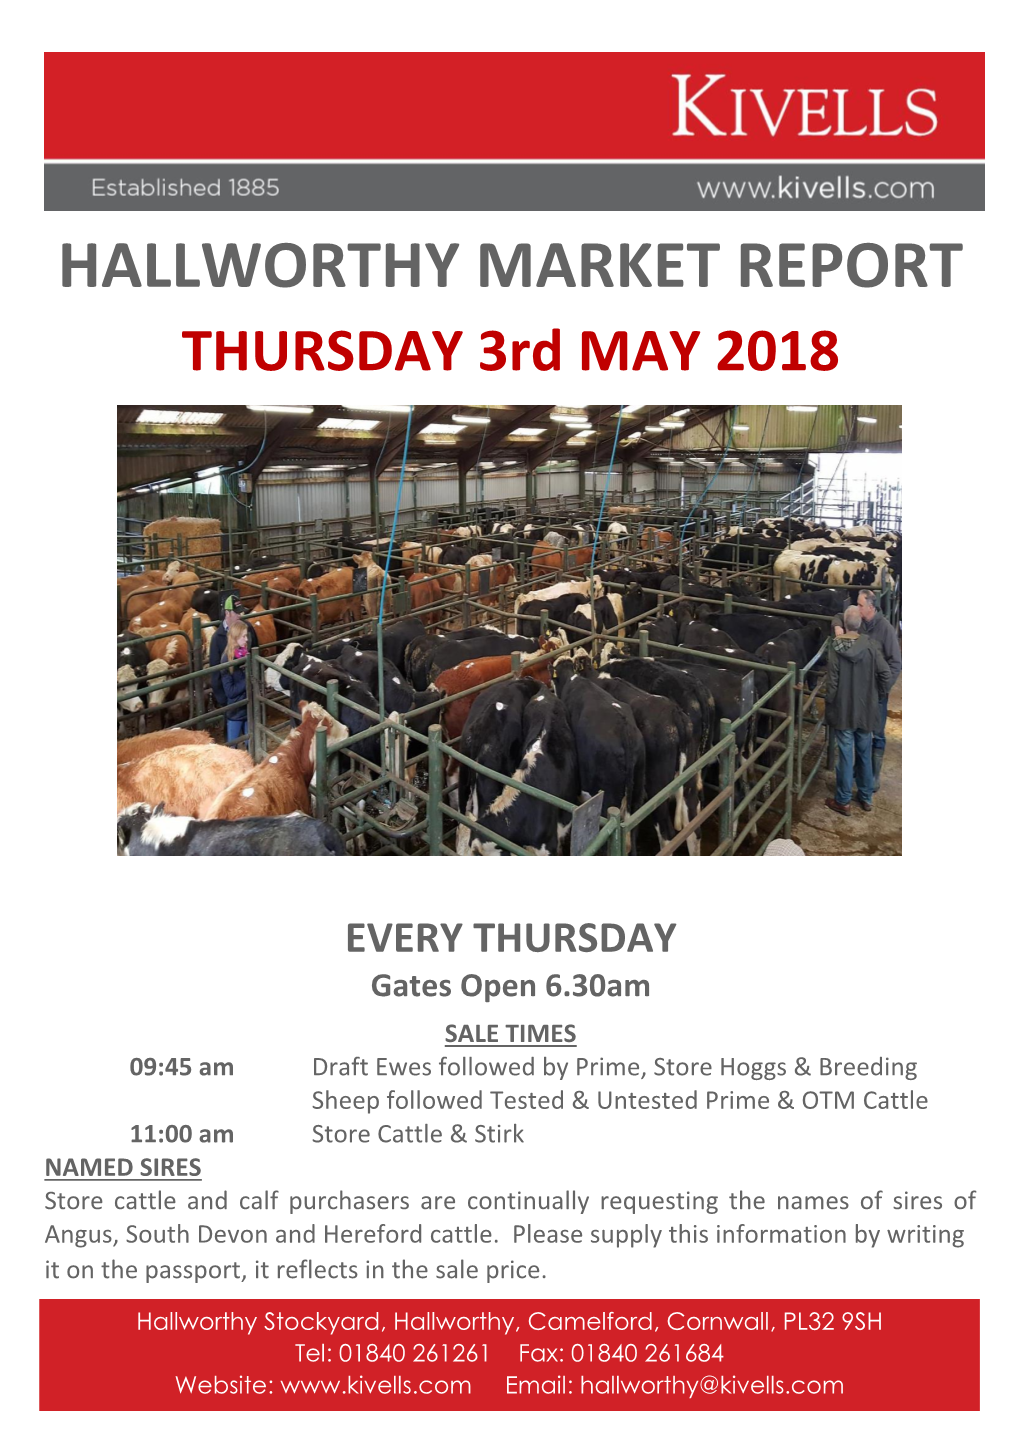 HALLWORTHY MARKET REPORT THURSDAY 3Rd MAY 2018